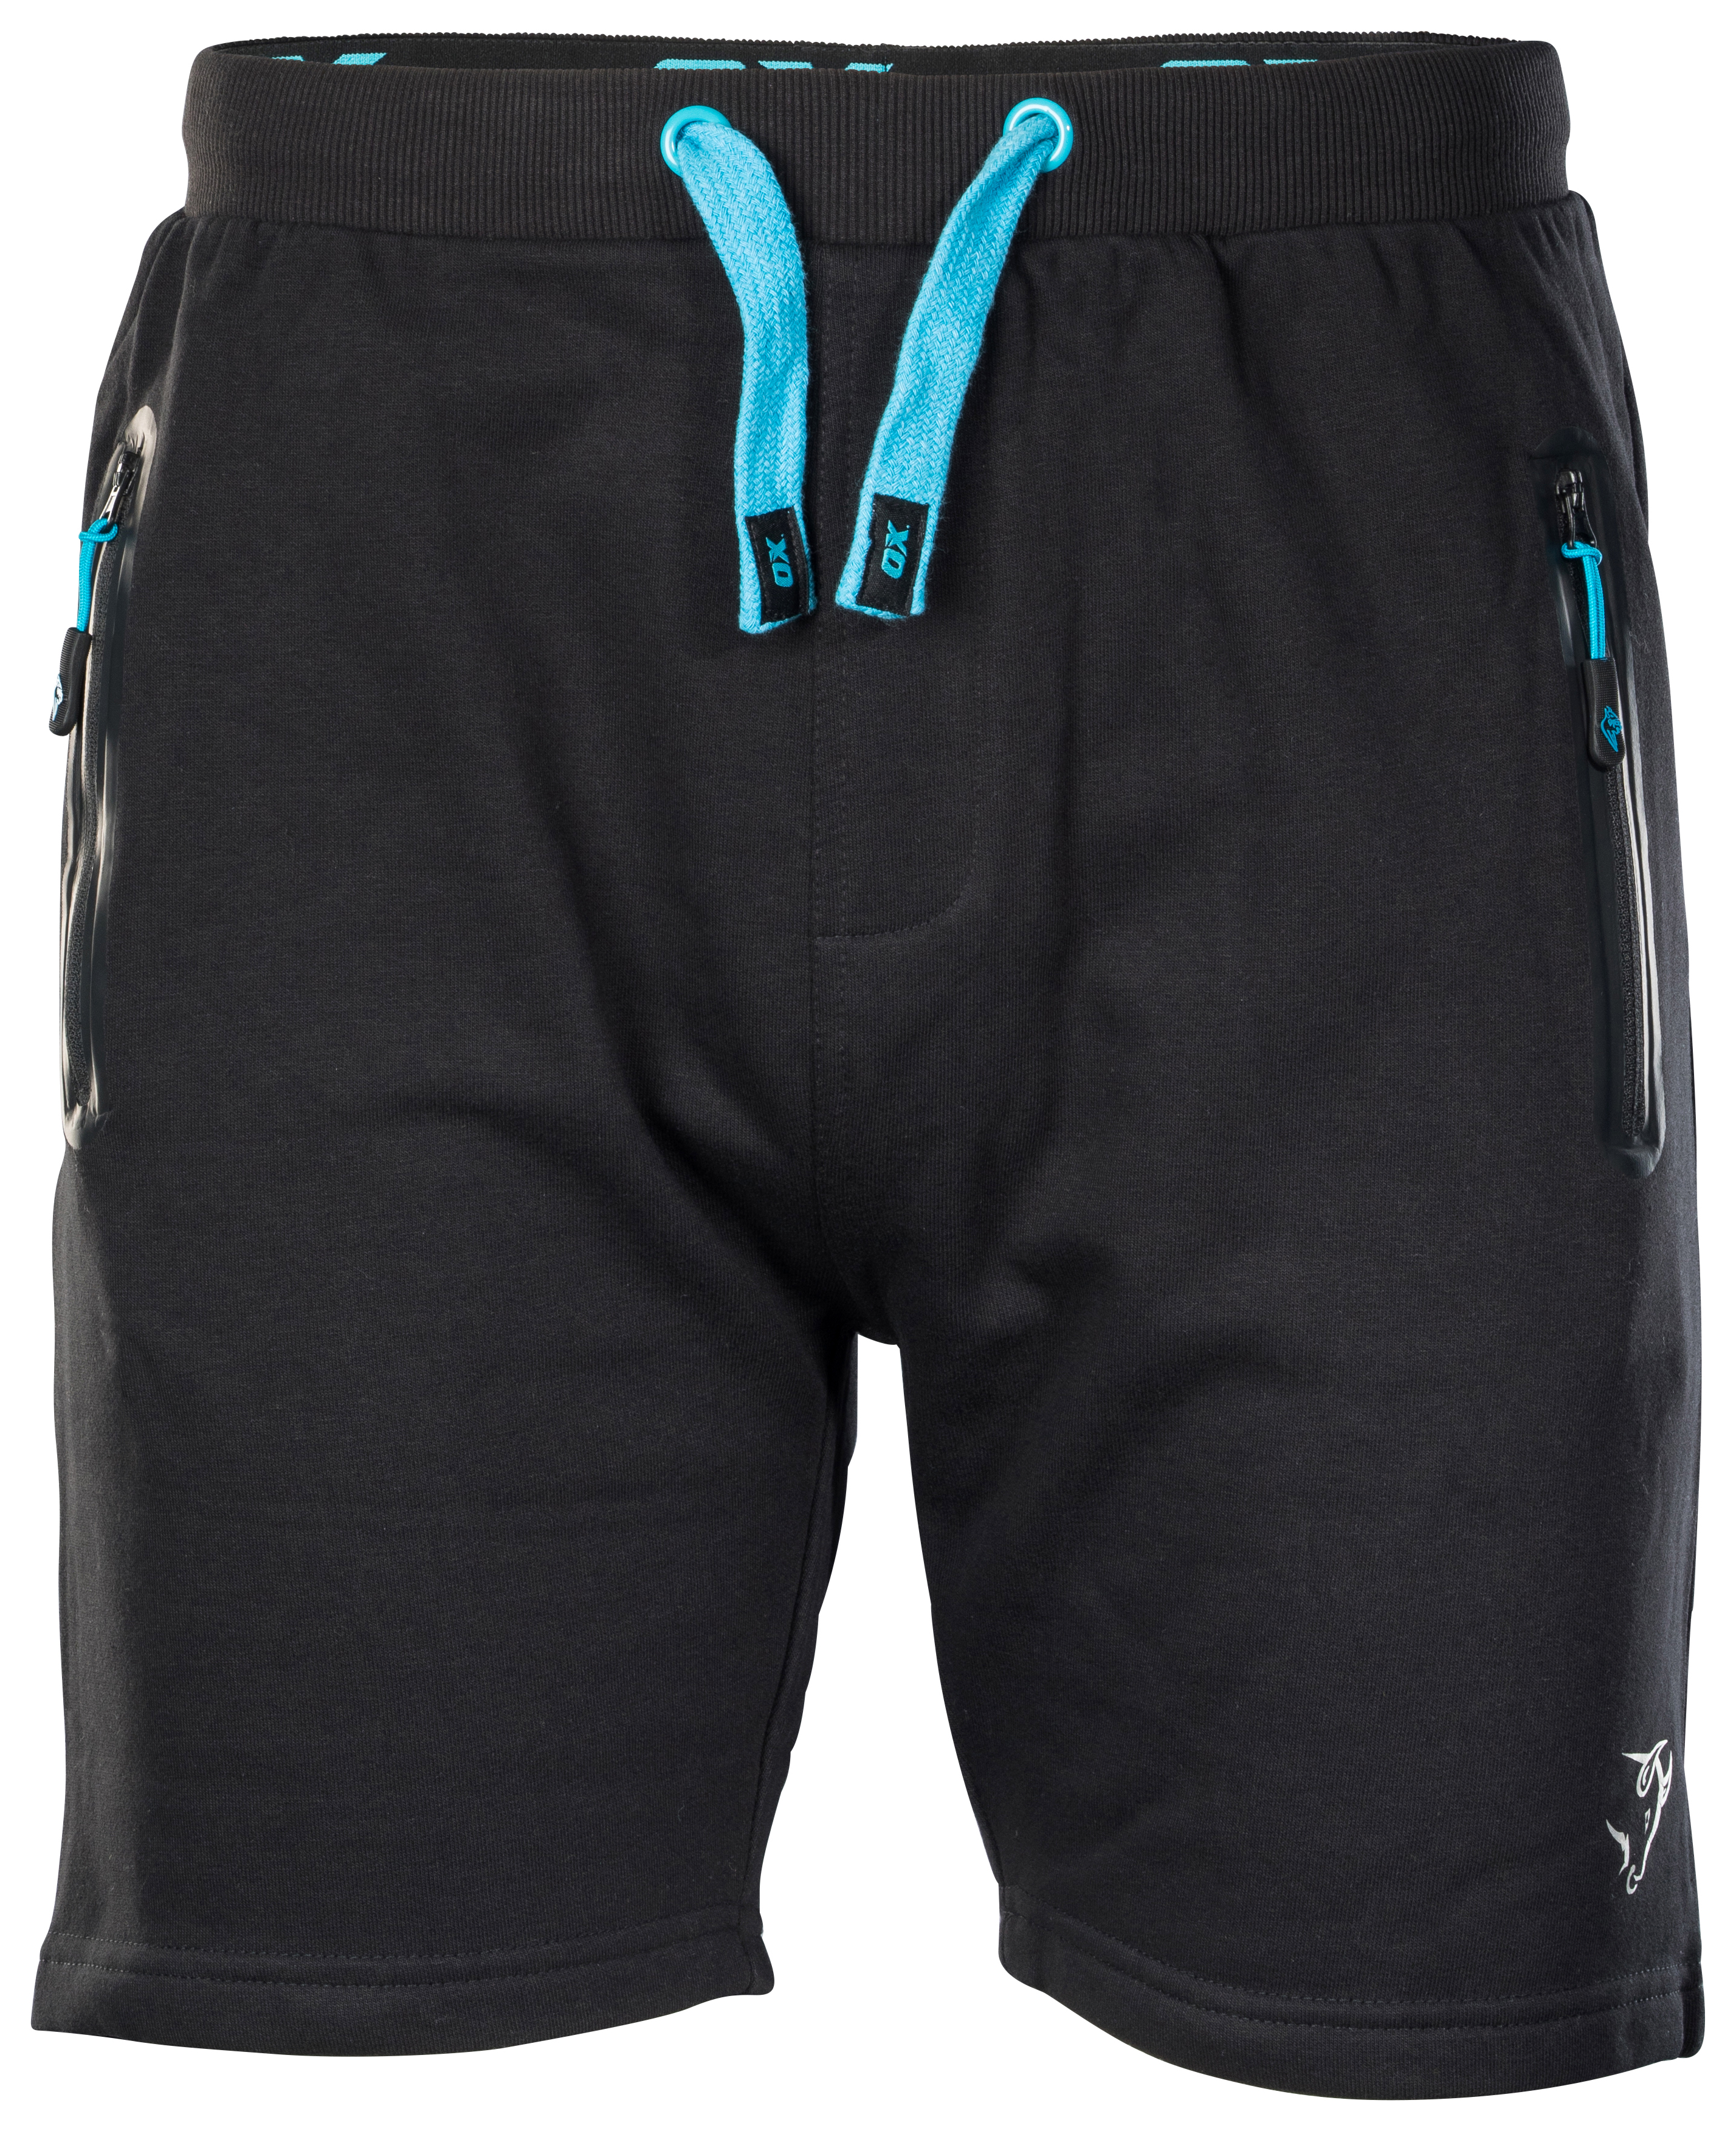 Image of OX OX-W553234 Black Jogger Shorts - 34W